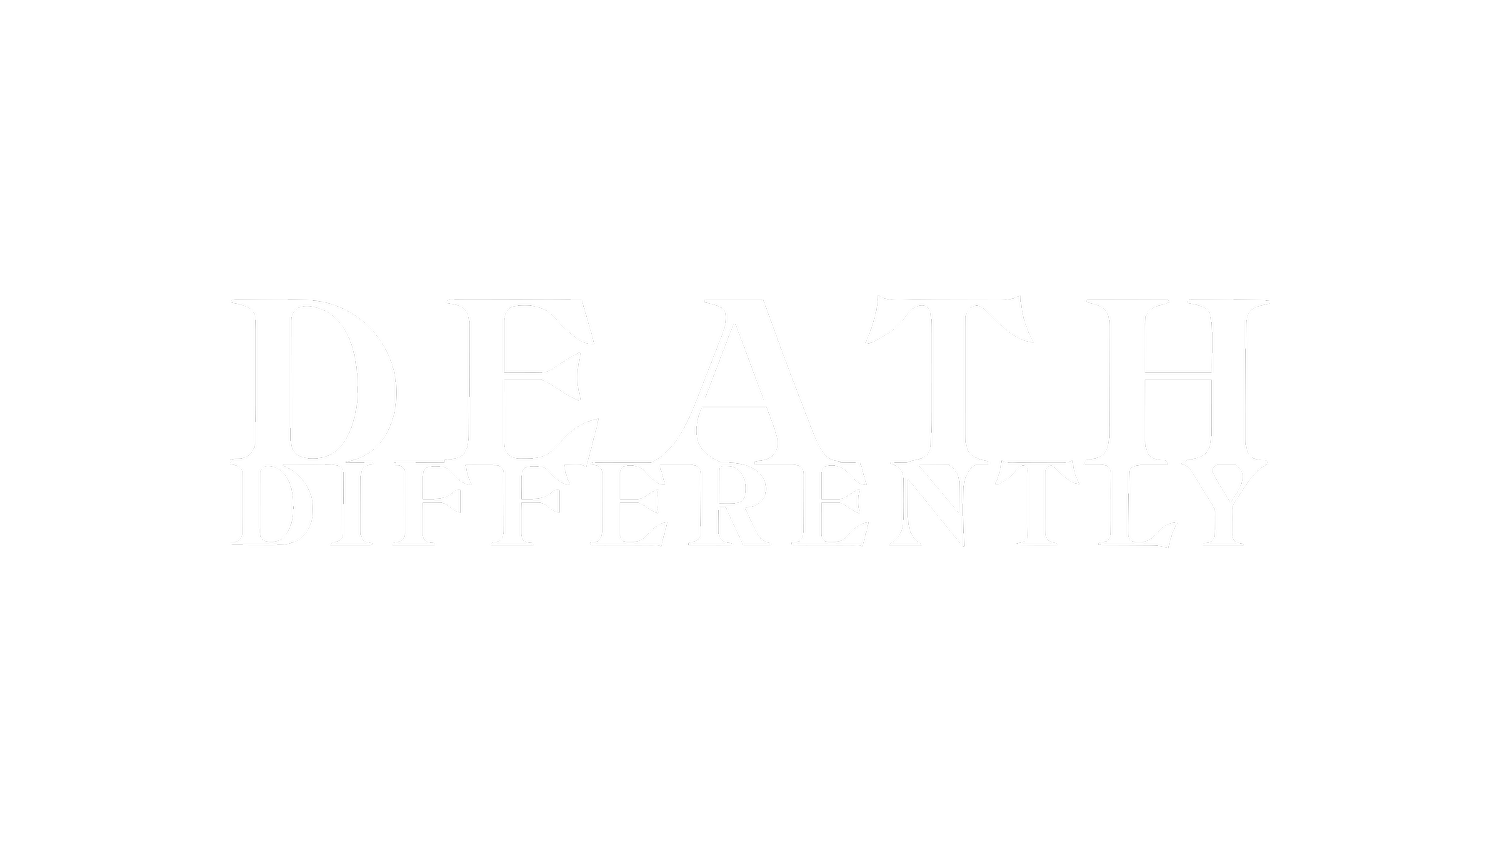 Death Differently